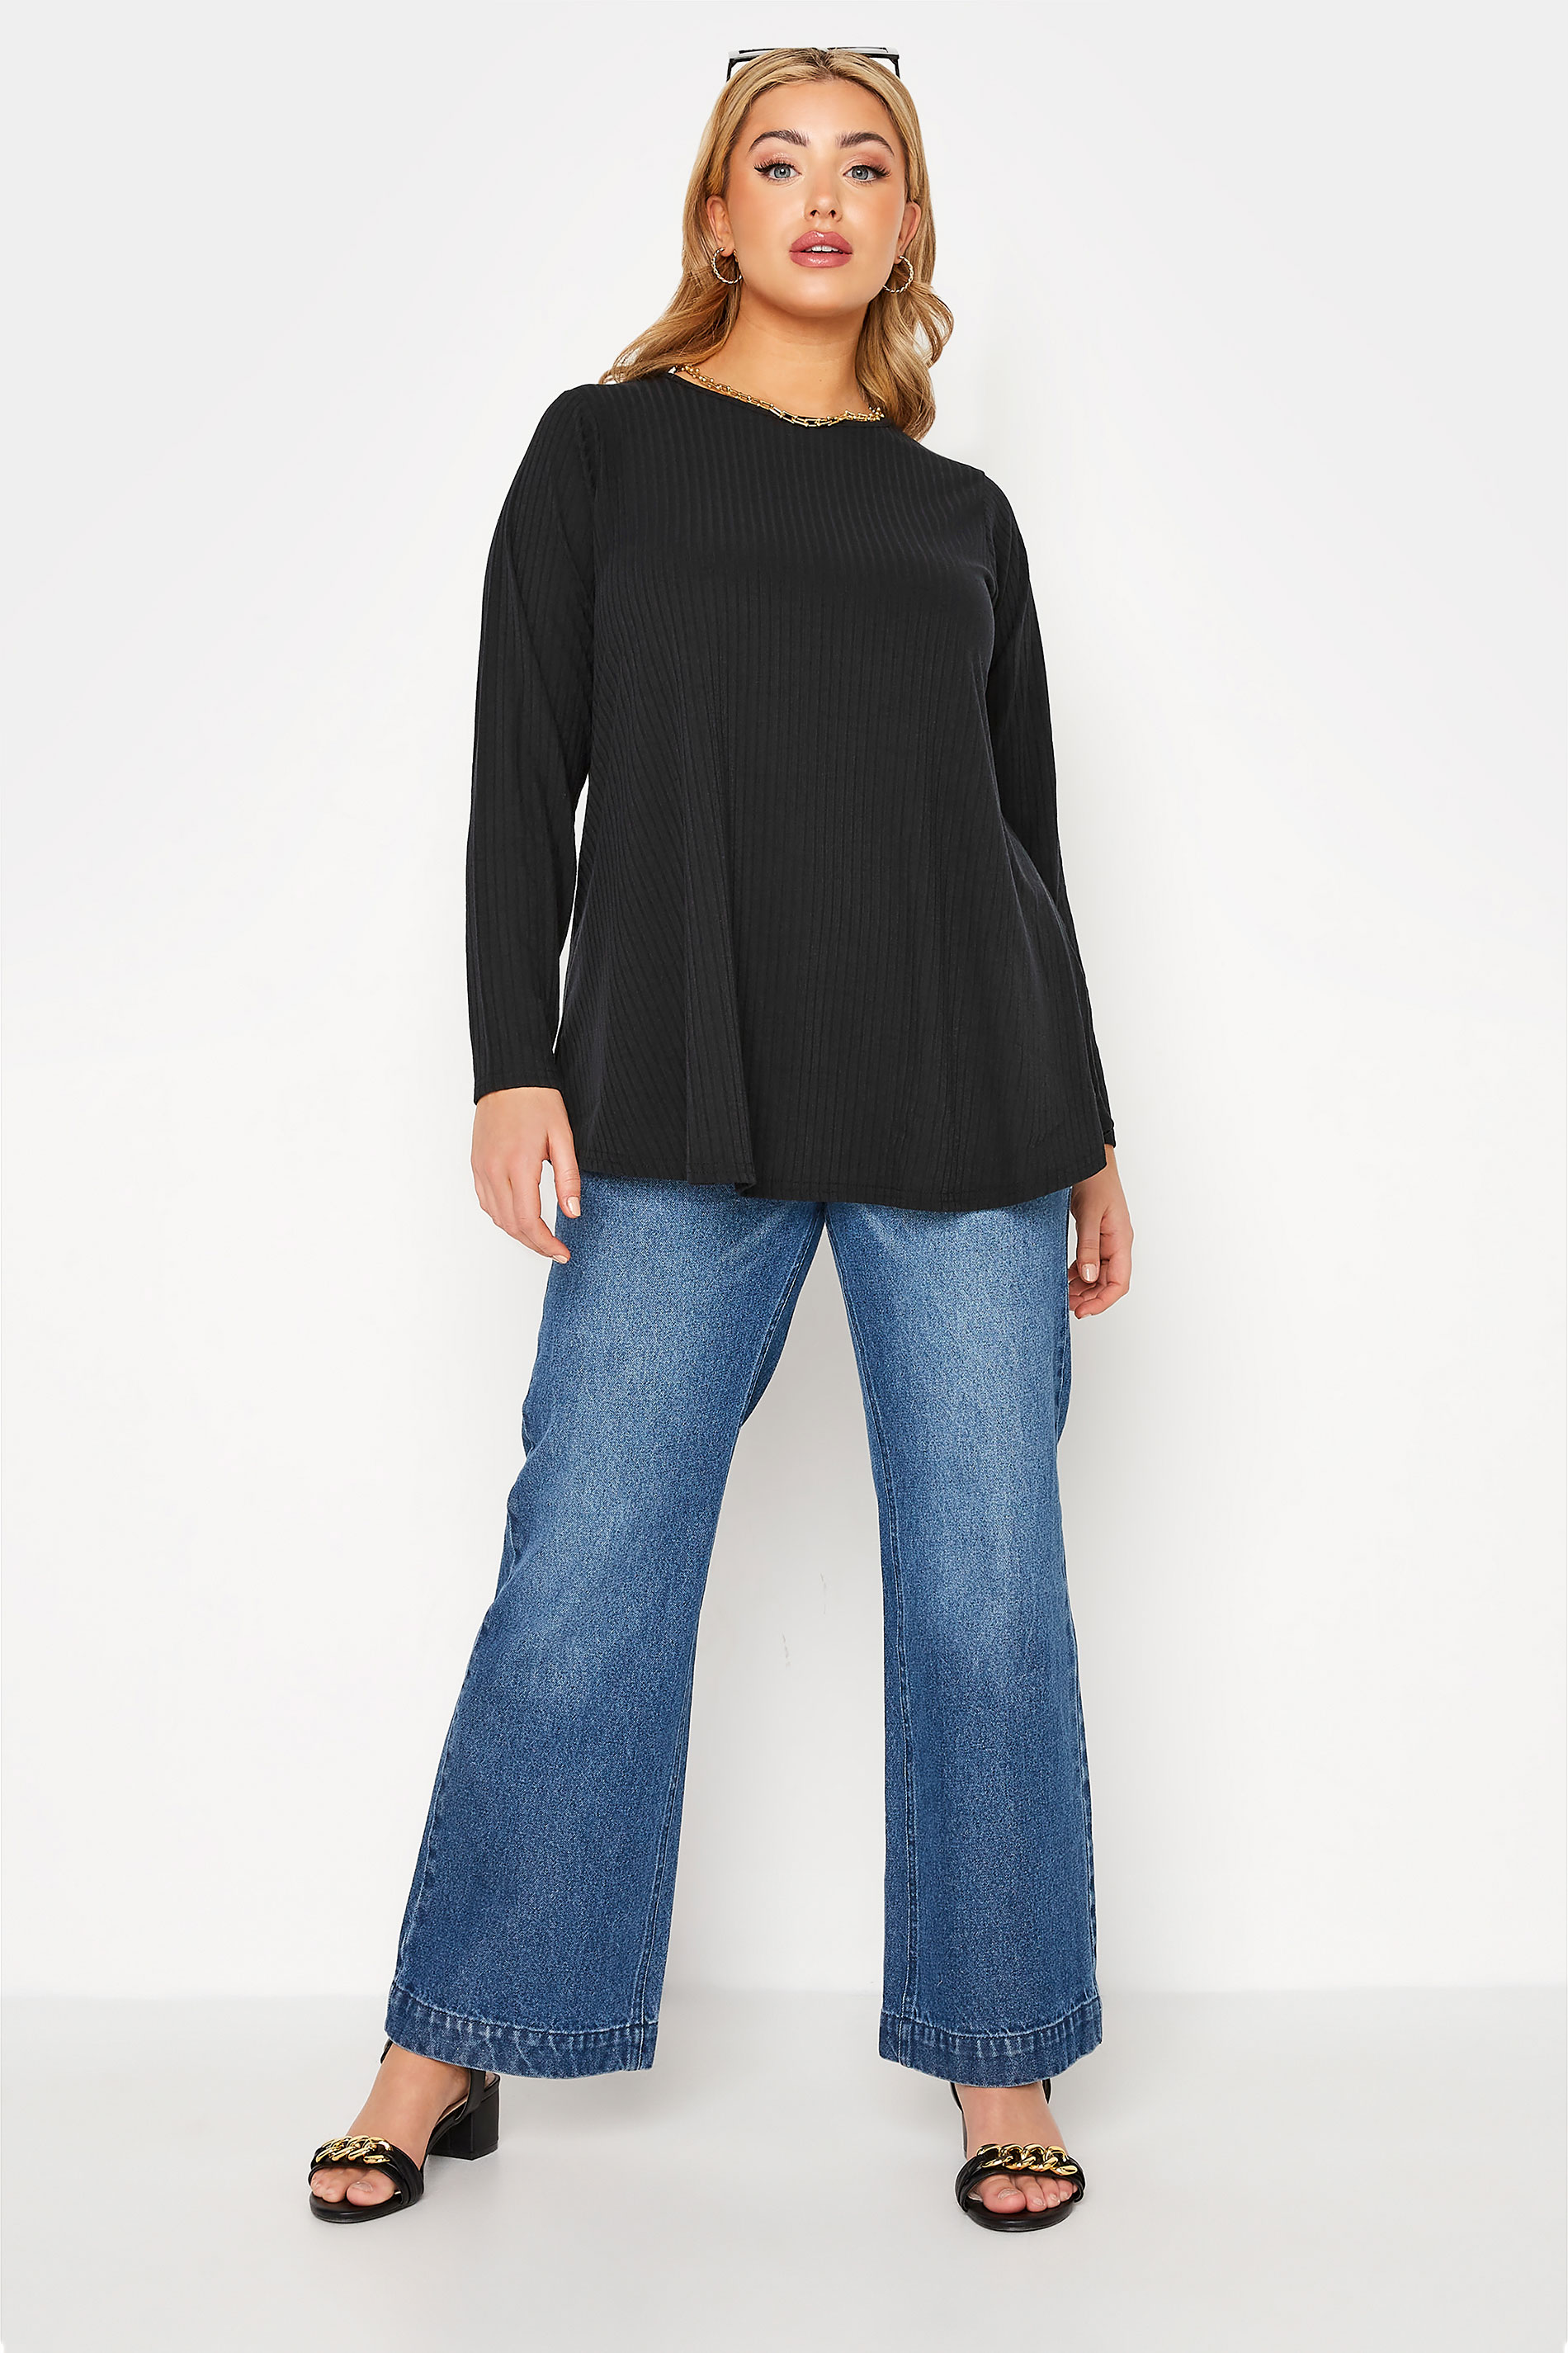 Grande taille  Tops Grande taille  Tops Jersey | LIMITED COLLECTION - Top Noir Nervuré Manches Longues - TD91278